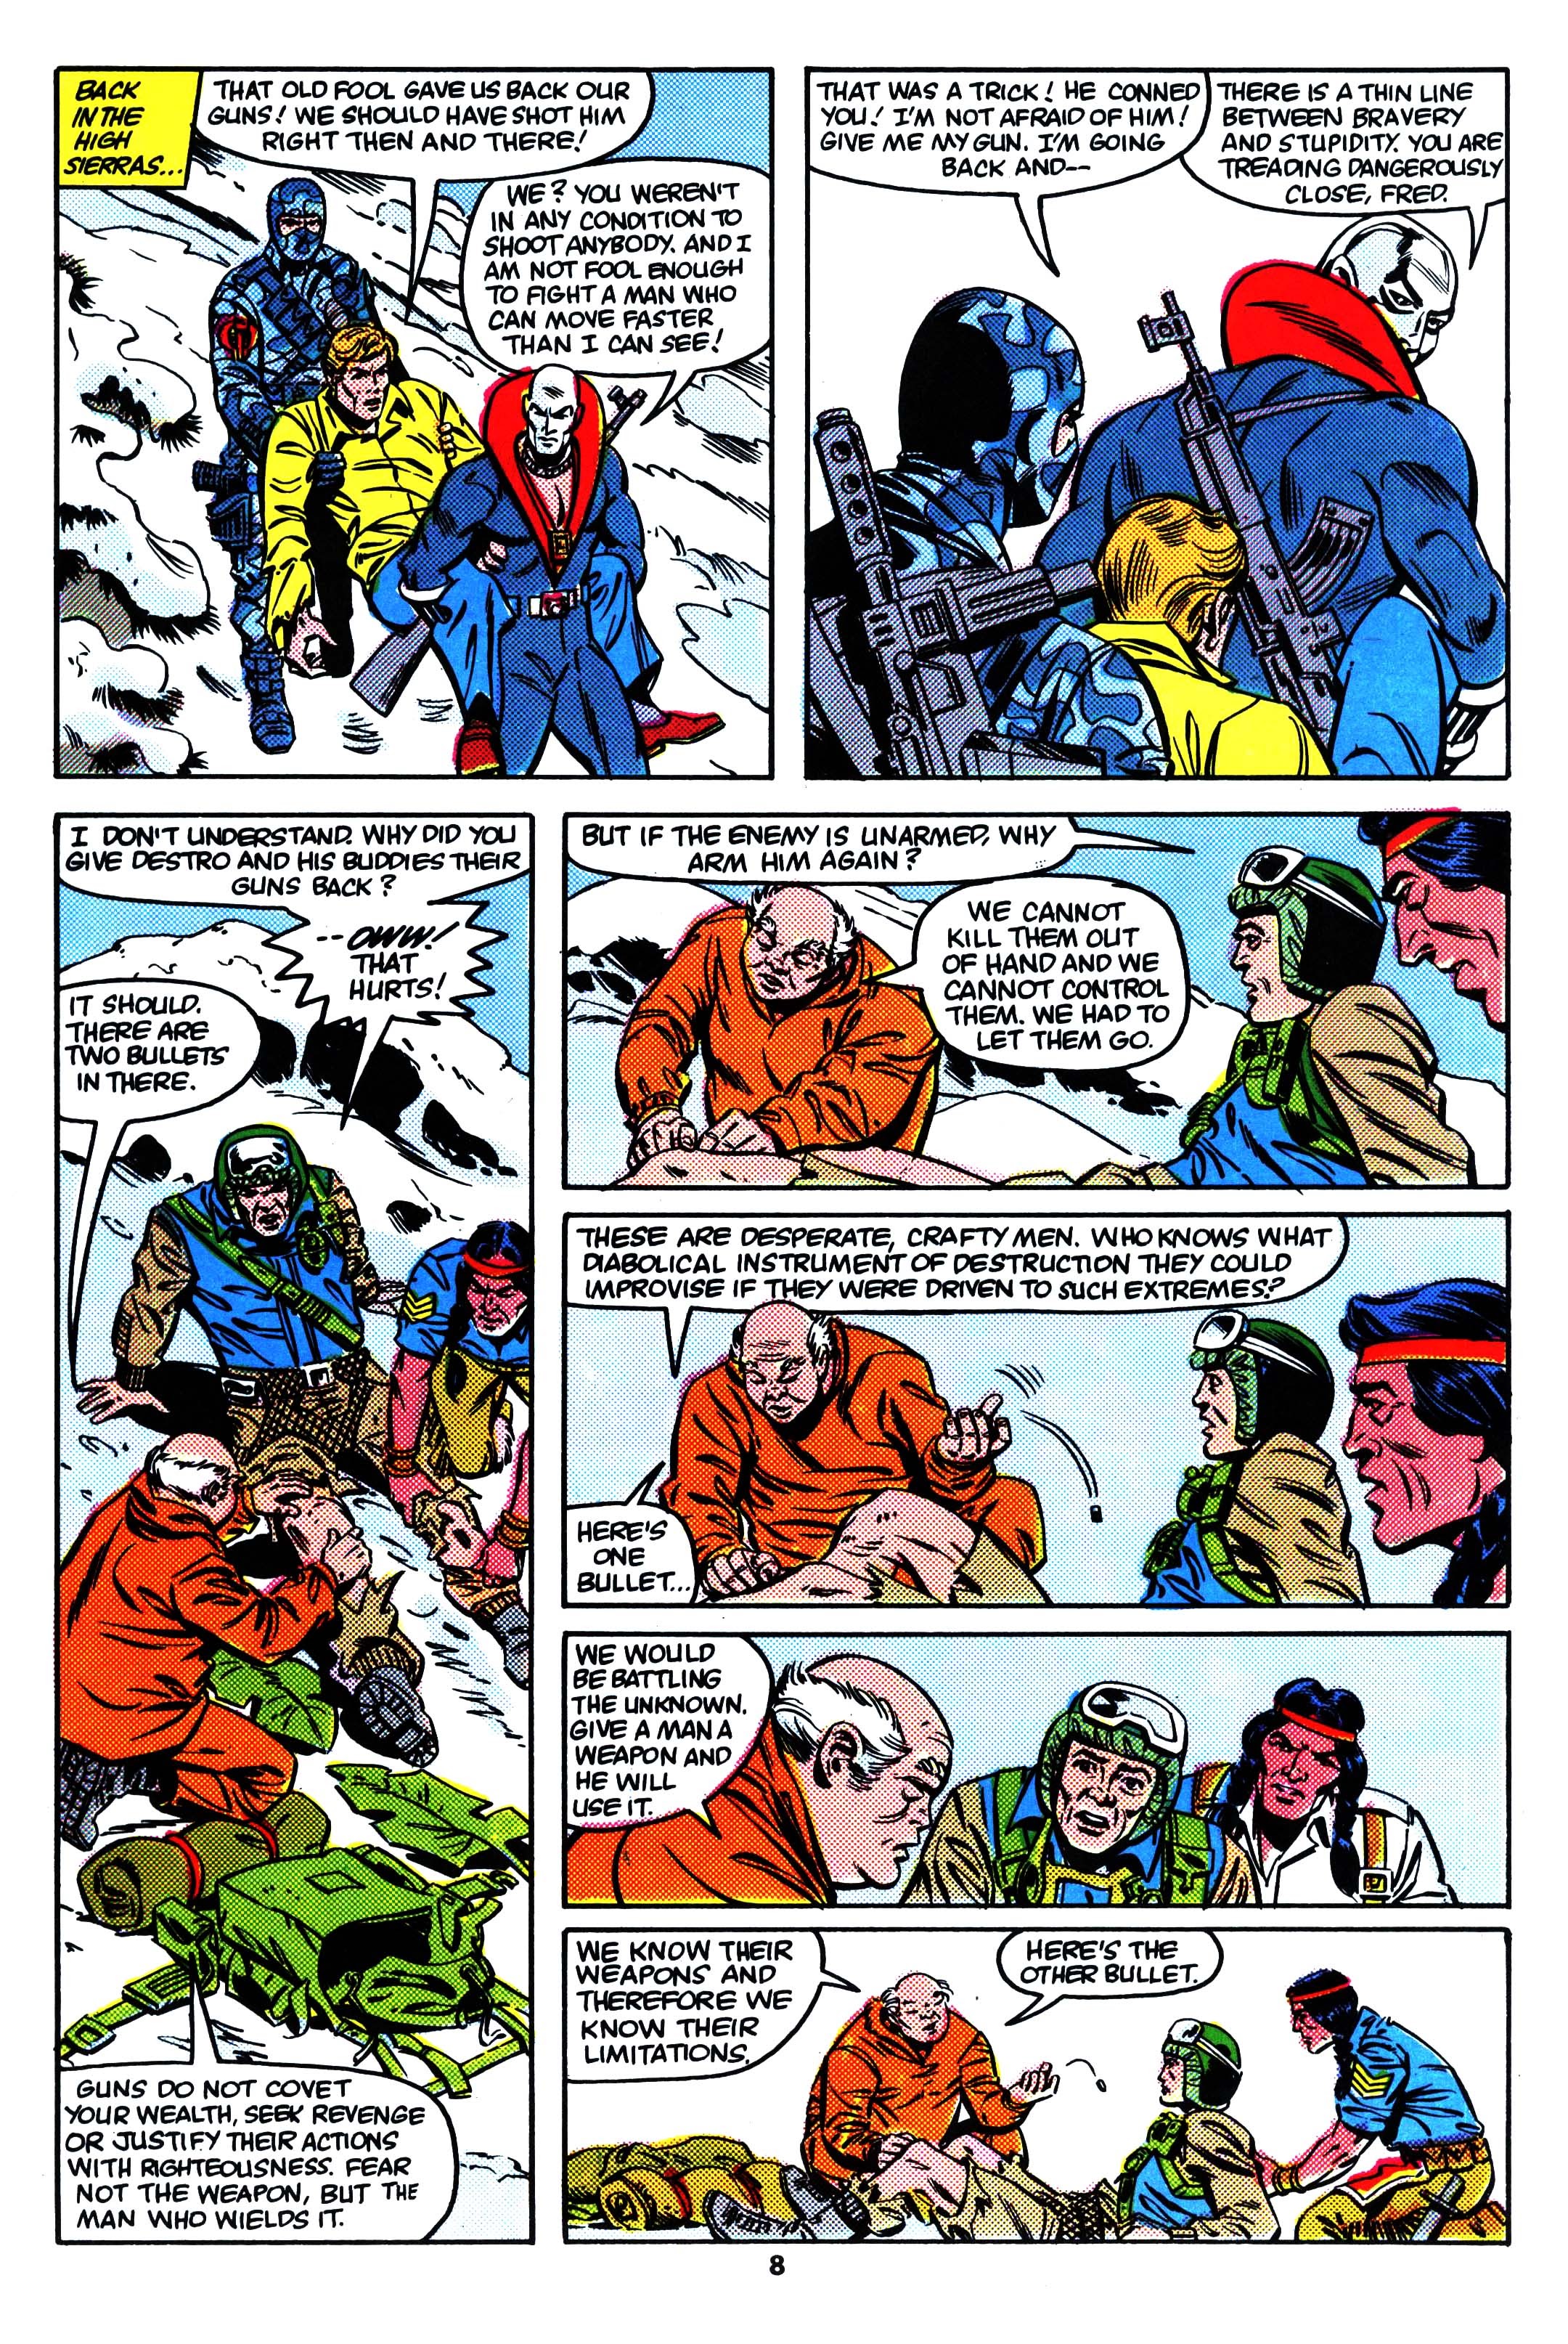 Read online Action Force comic -  Issue #22 - 8